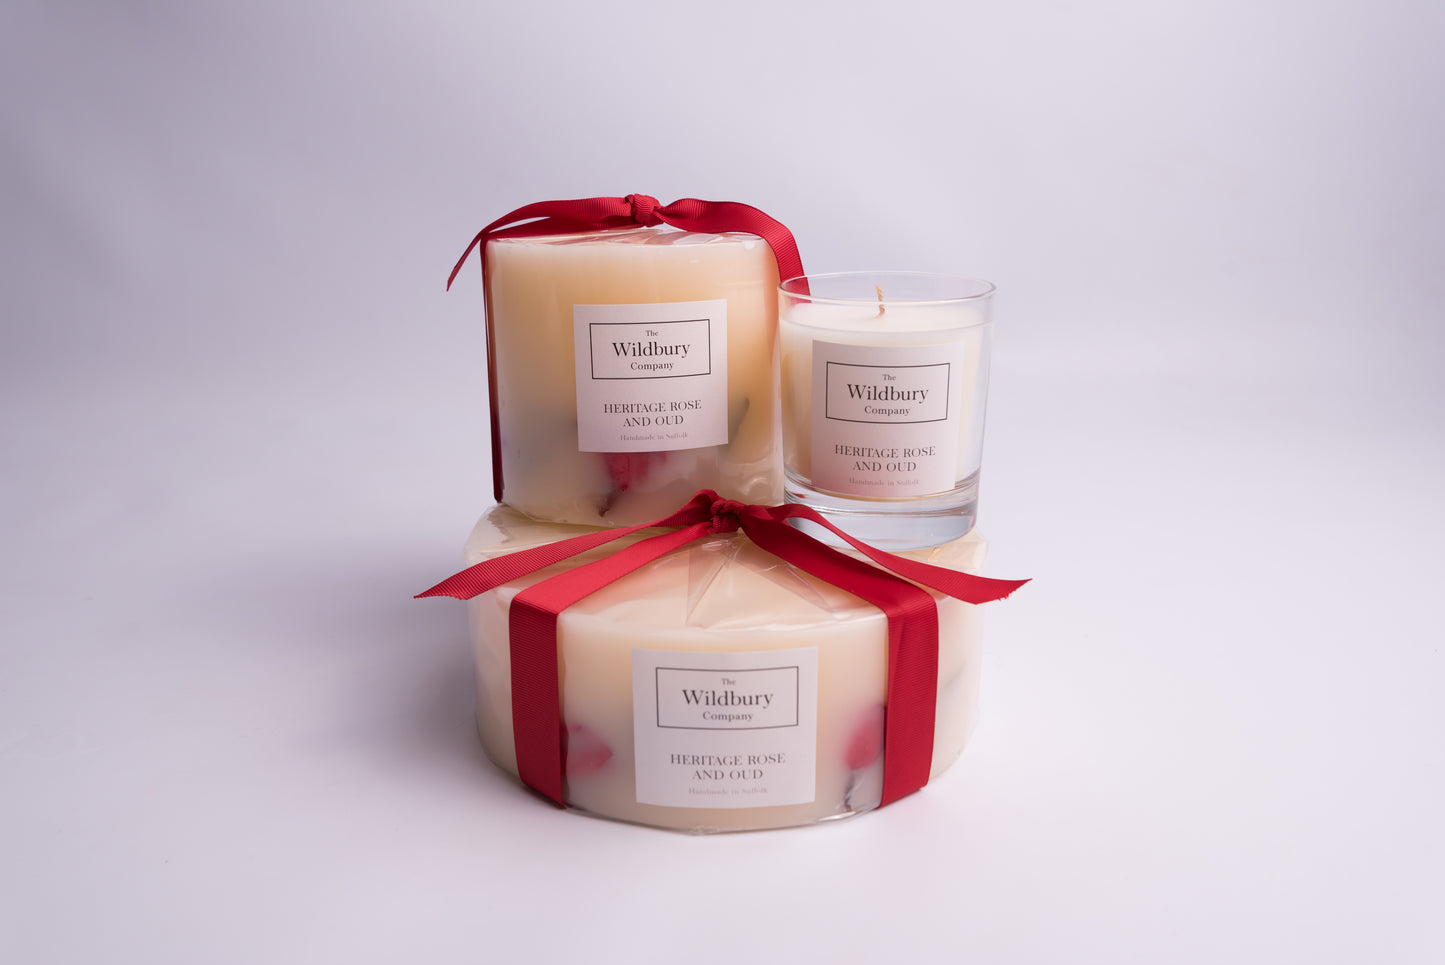 Heritage Rose and Oud Signature Candle